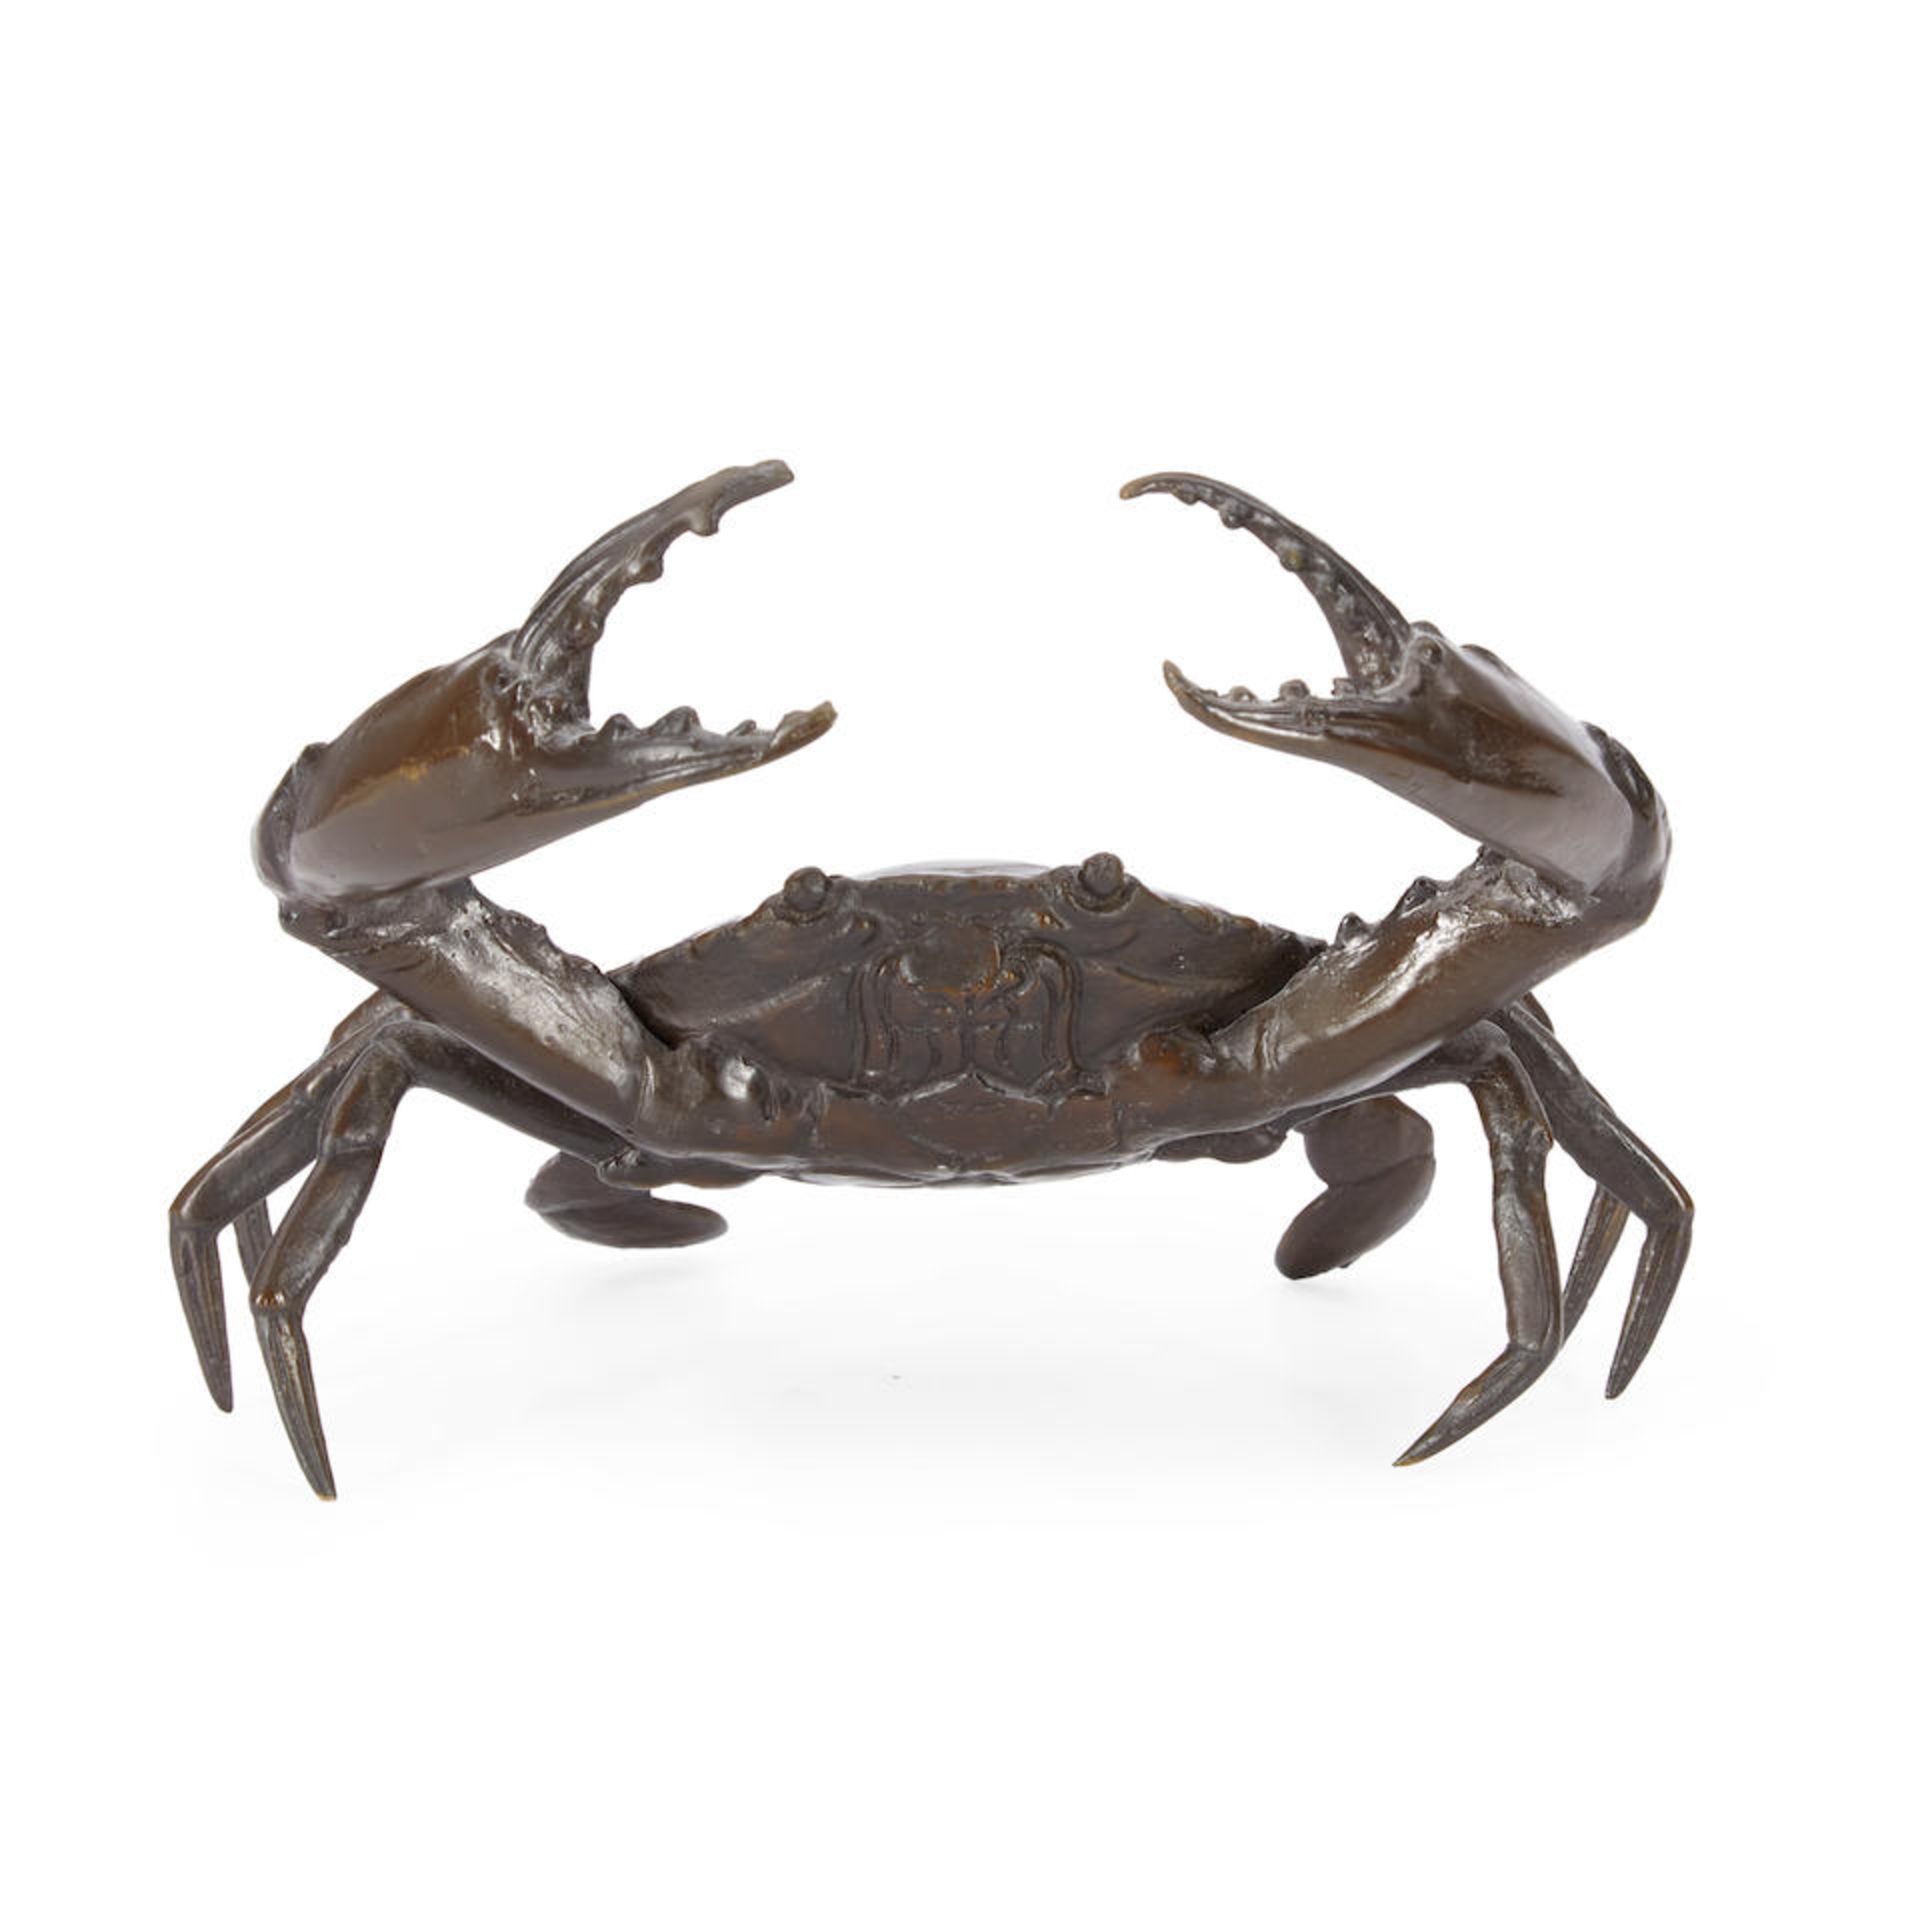 A BRONZE ARTICULATED MODEL OF A CRAB - Image 2 of 3